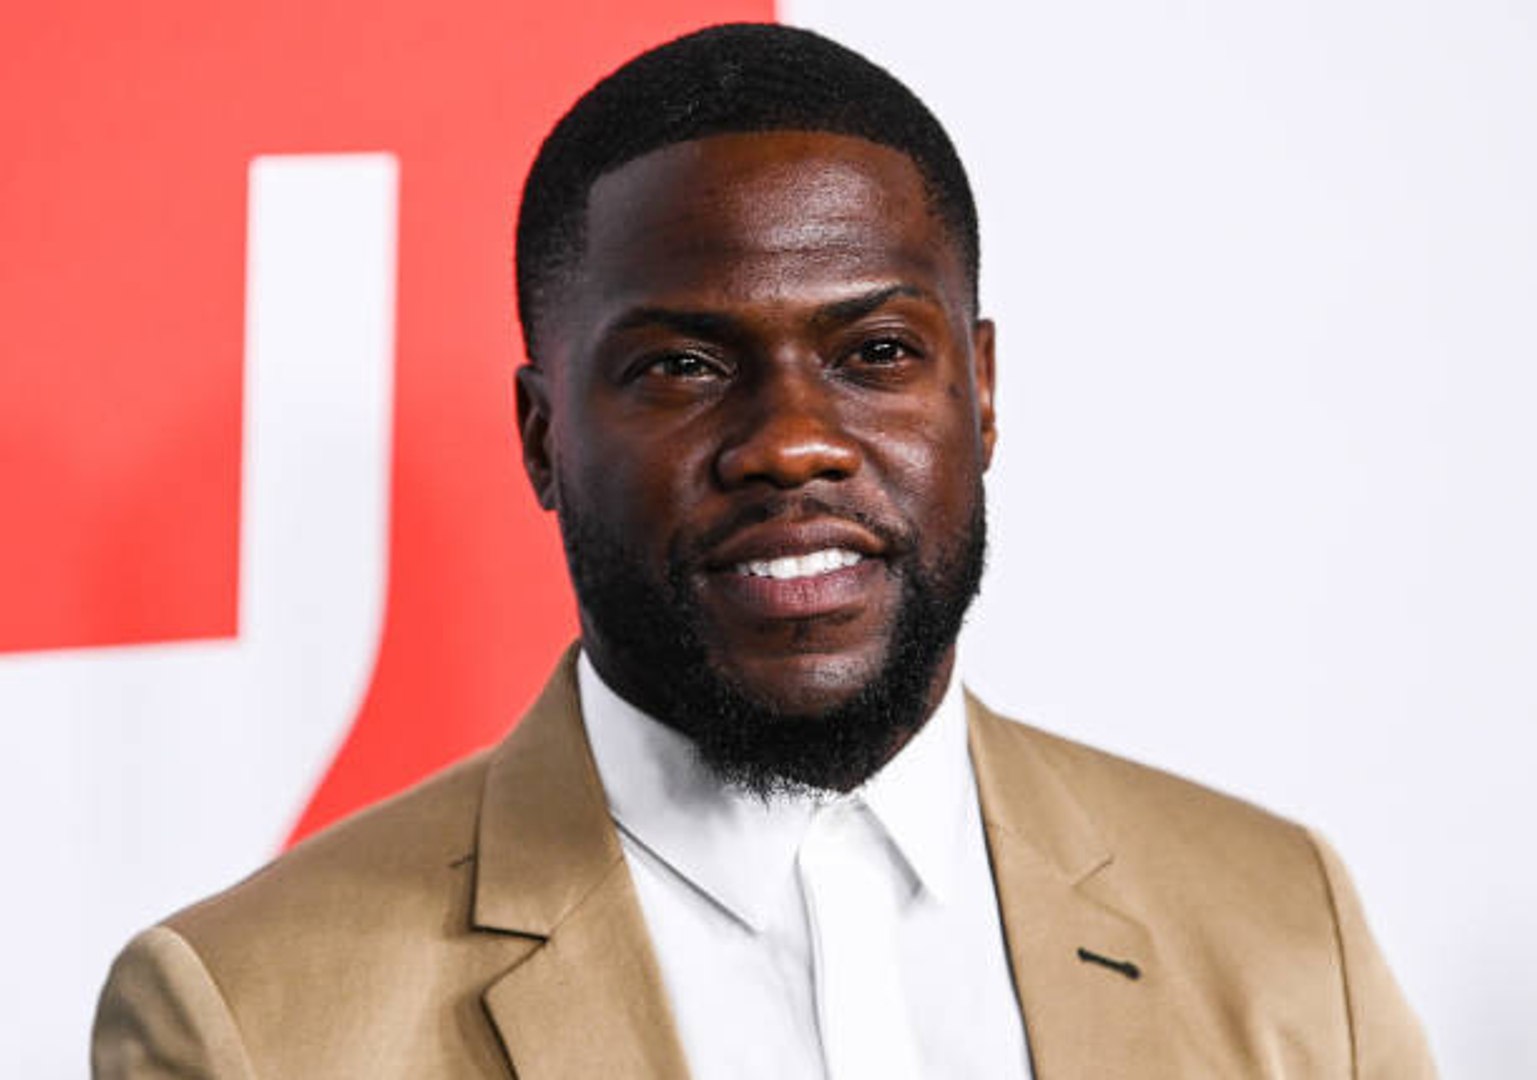 Kevin Hart Named Highest-Earning Stand-up Comedian of 2019 by 'Forbes'